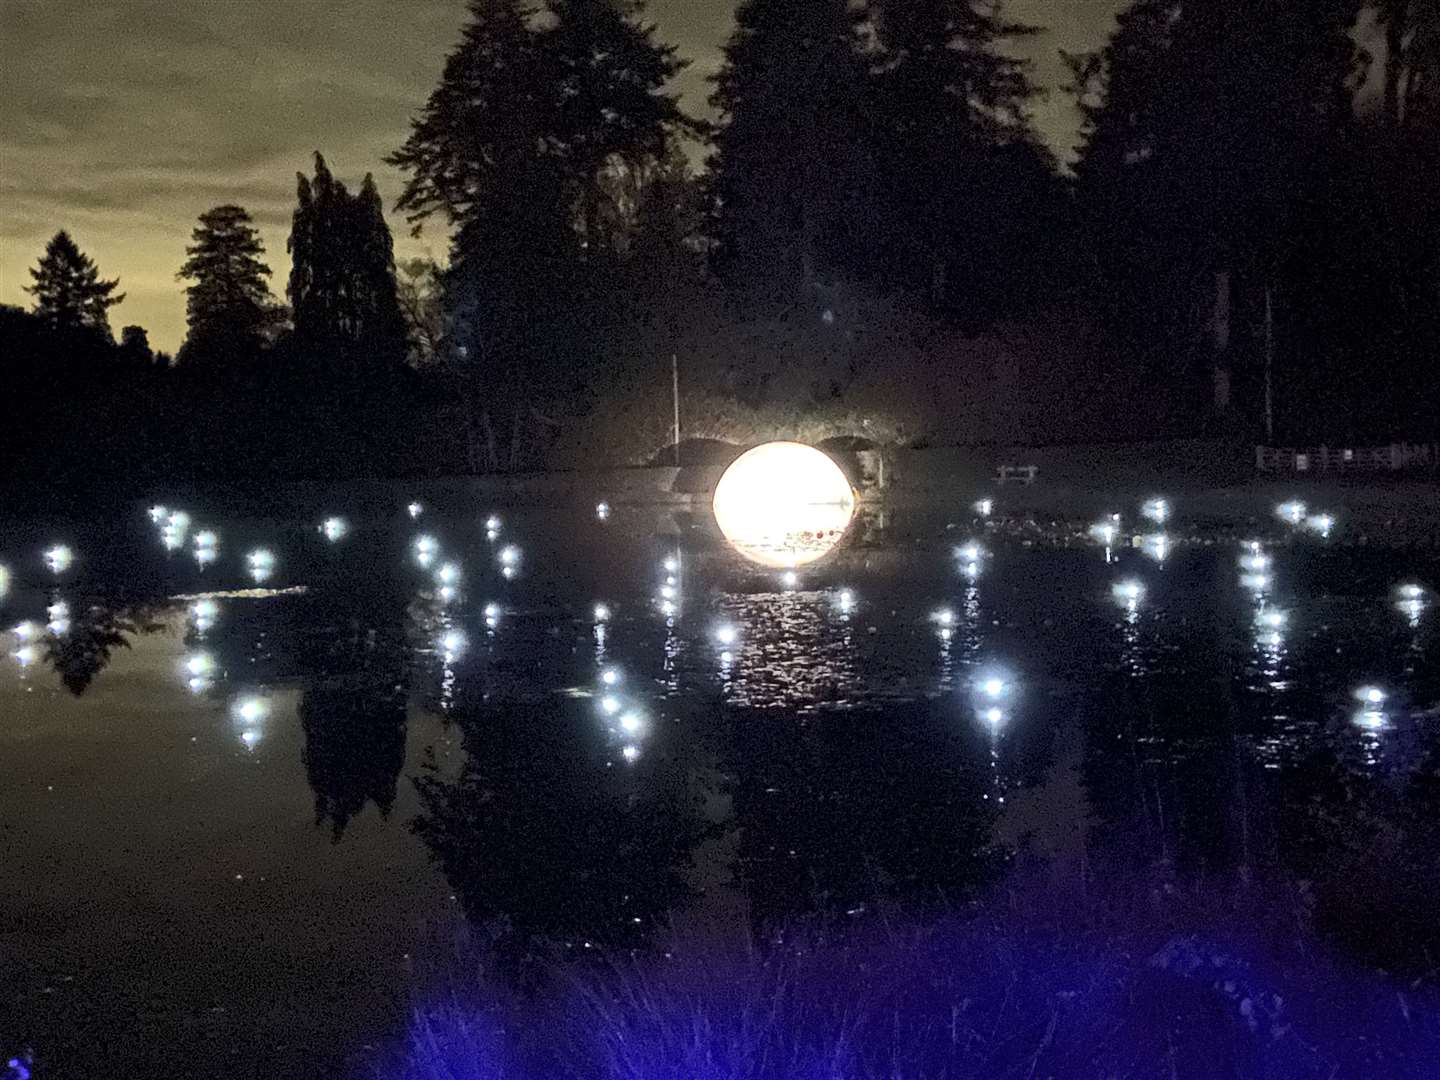 Photos can't do the moon and stars installation justice